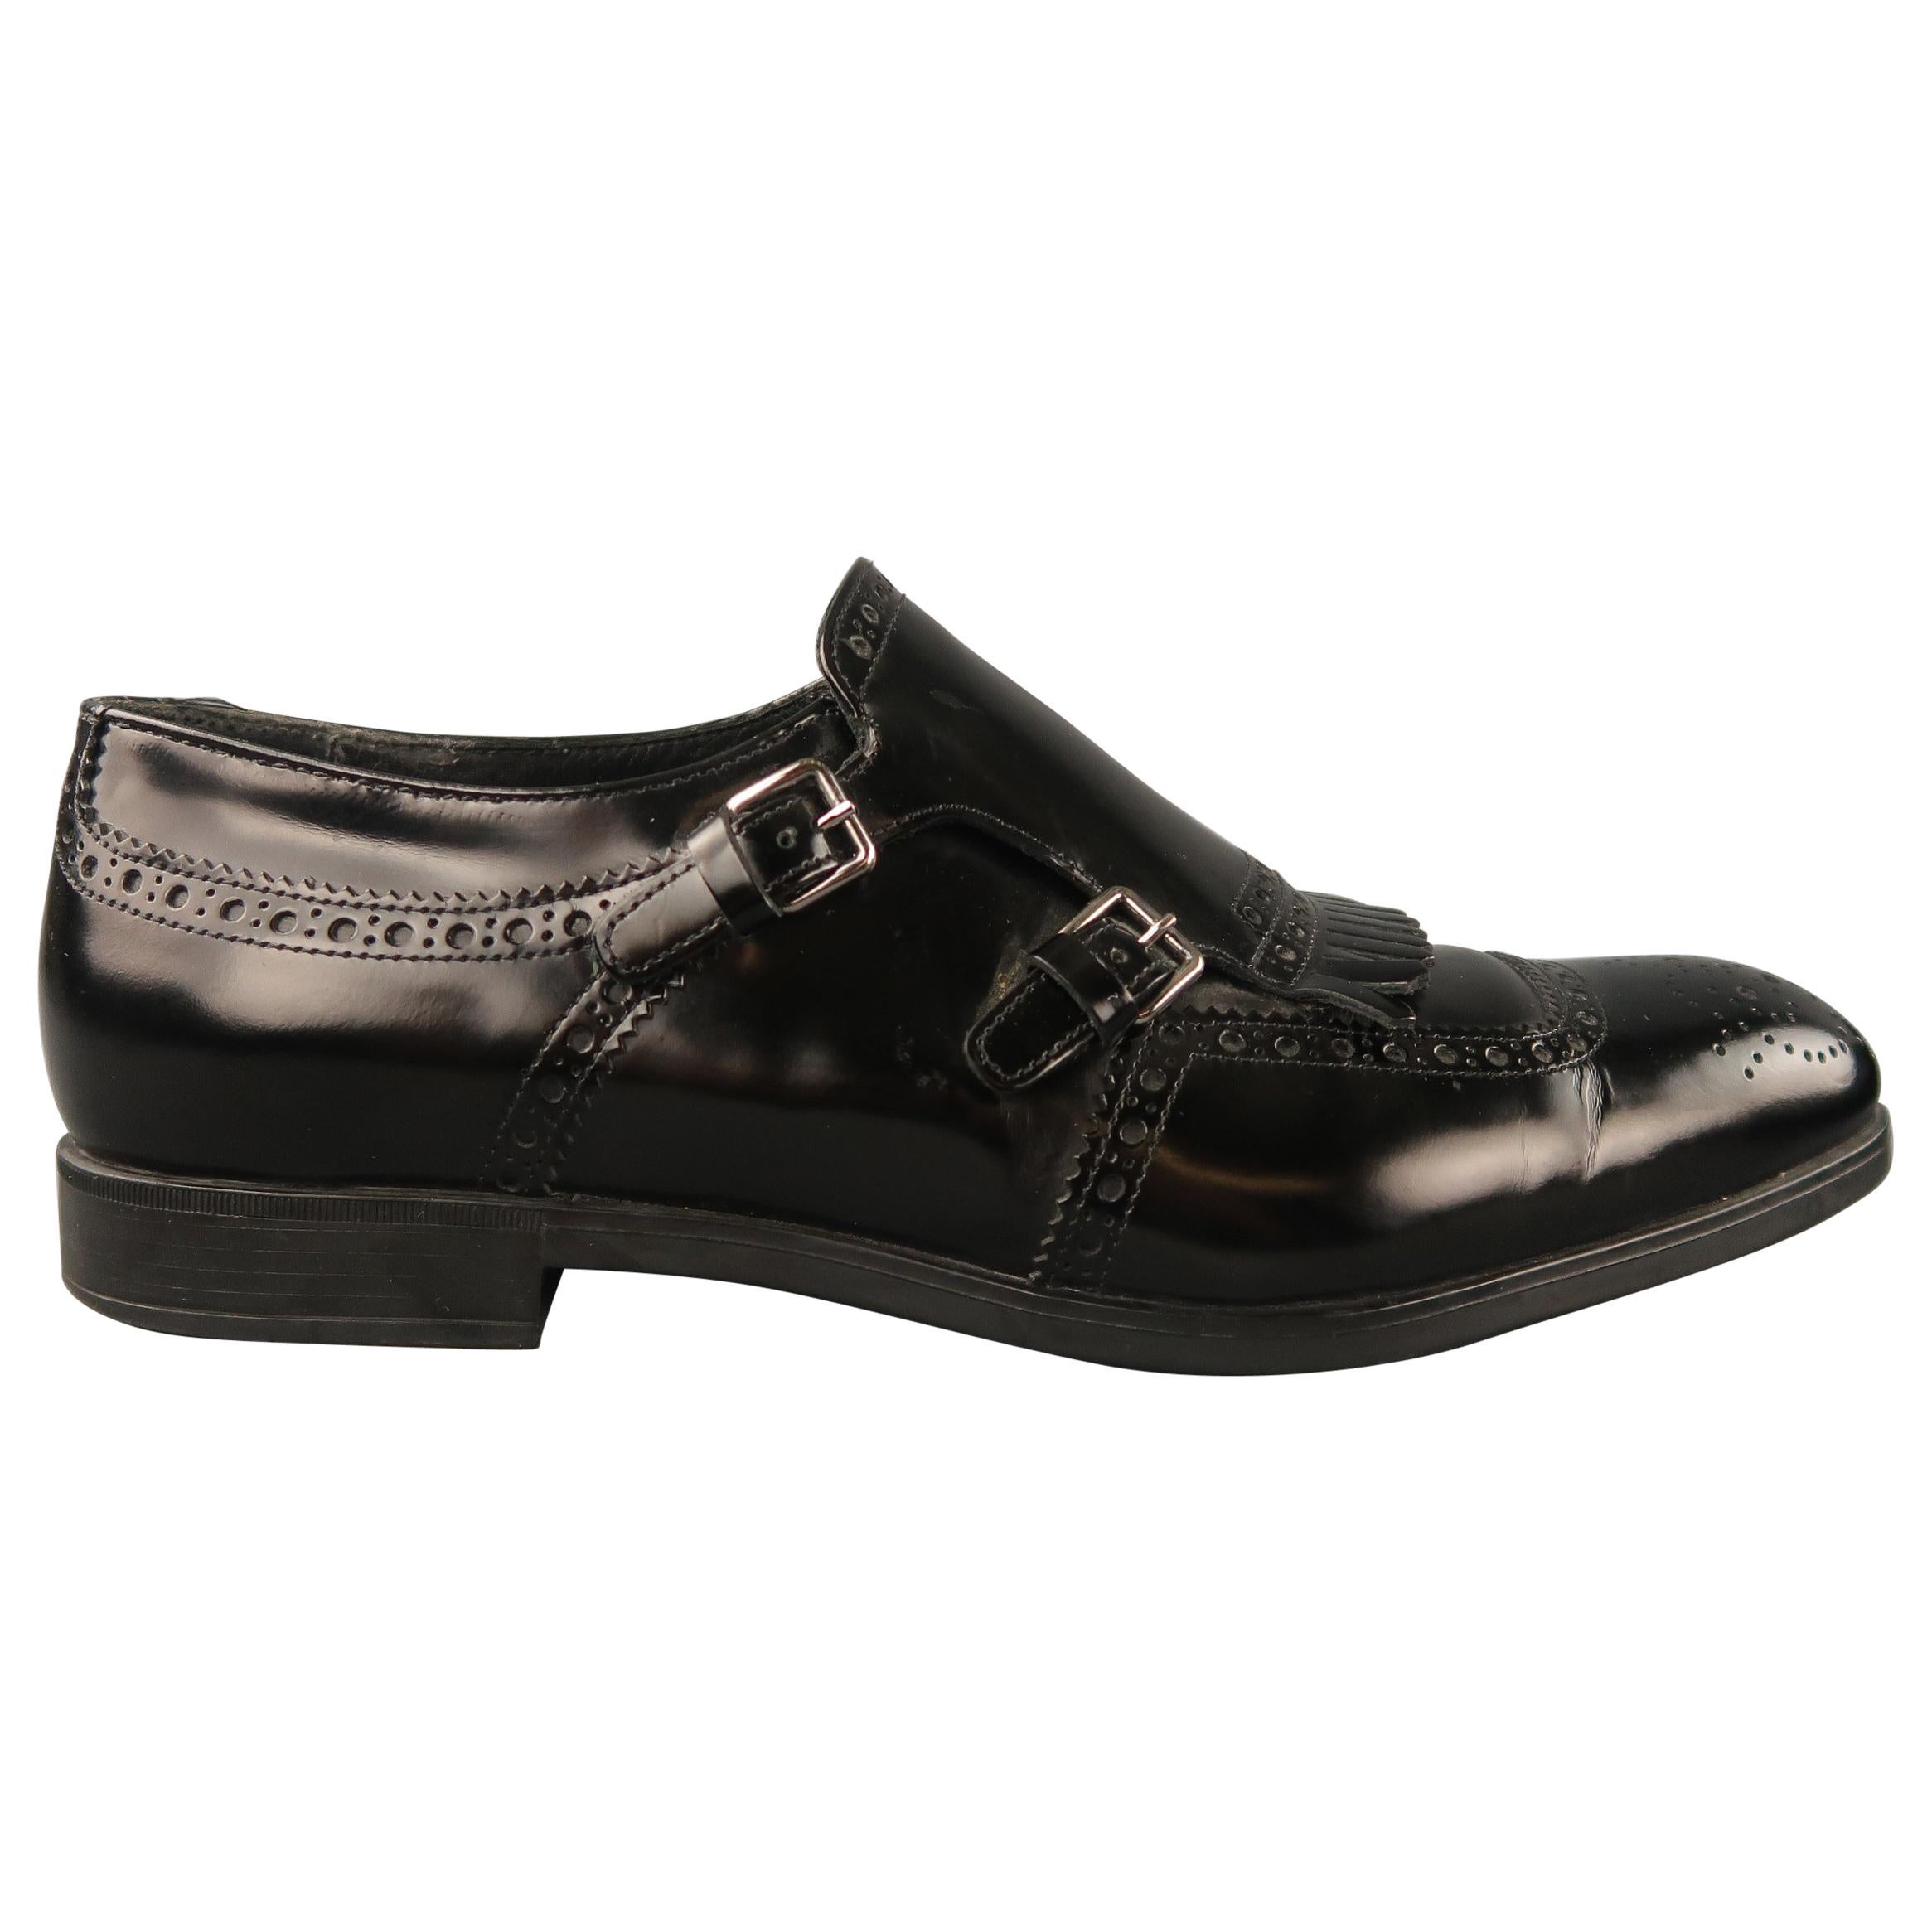 PRADA Size 7.5 Black Perforated Leather Double Monk Strap Loafers